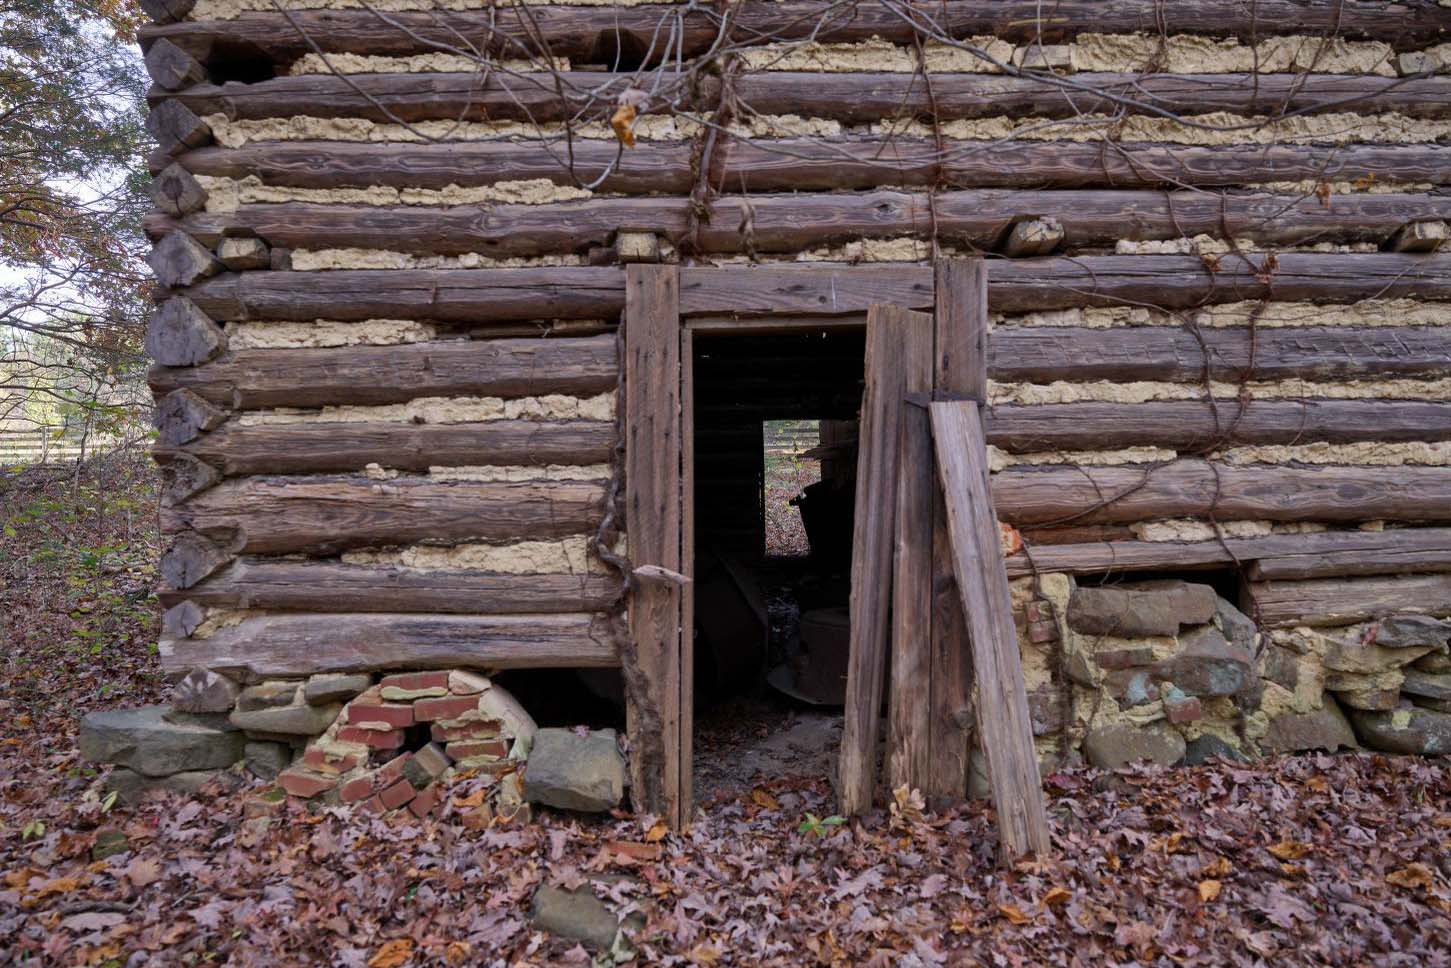 Remnants of a slave cabin at Historic Stagville, N.C., one of the largest plantations of the pre-Civil War South.